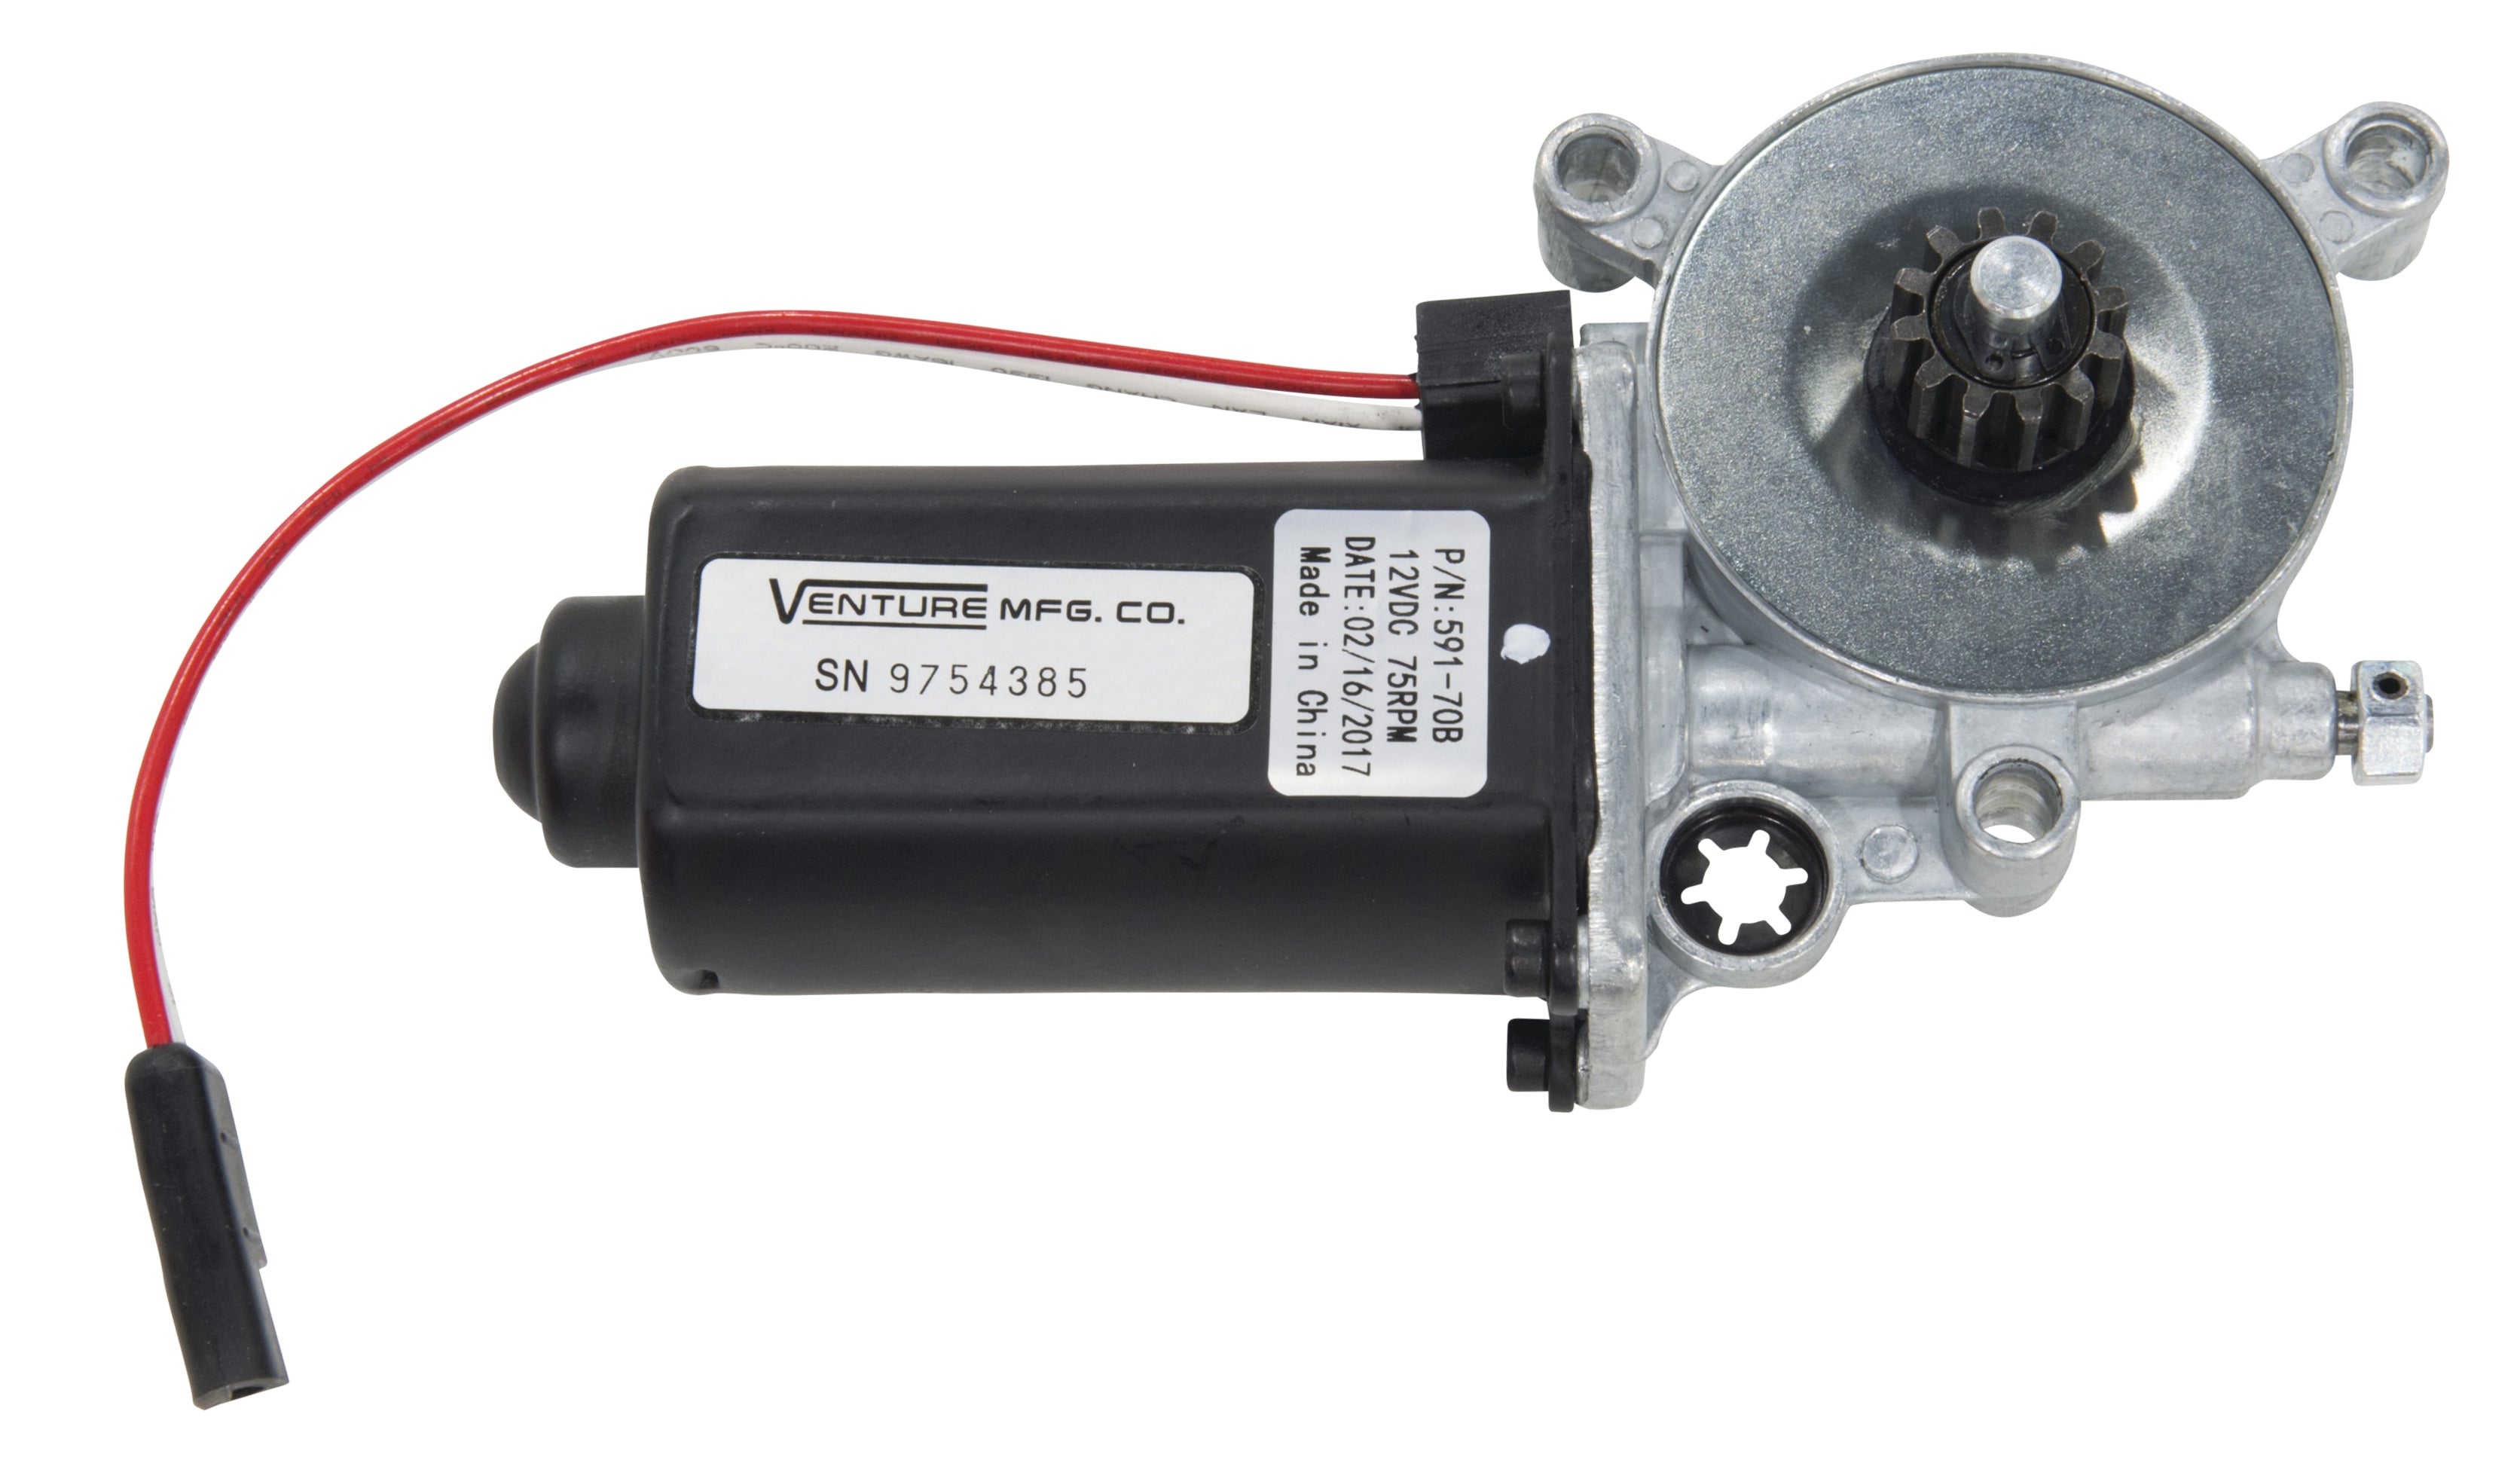 Lippert 373566 Replacement Motor with Single 2-Way Connector for Solera Power Awnings